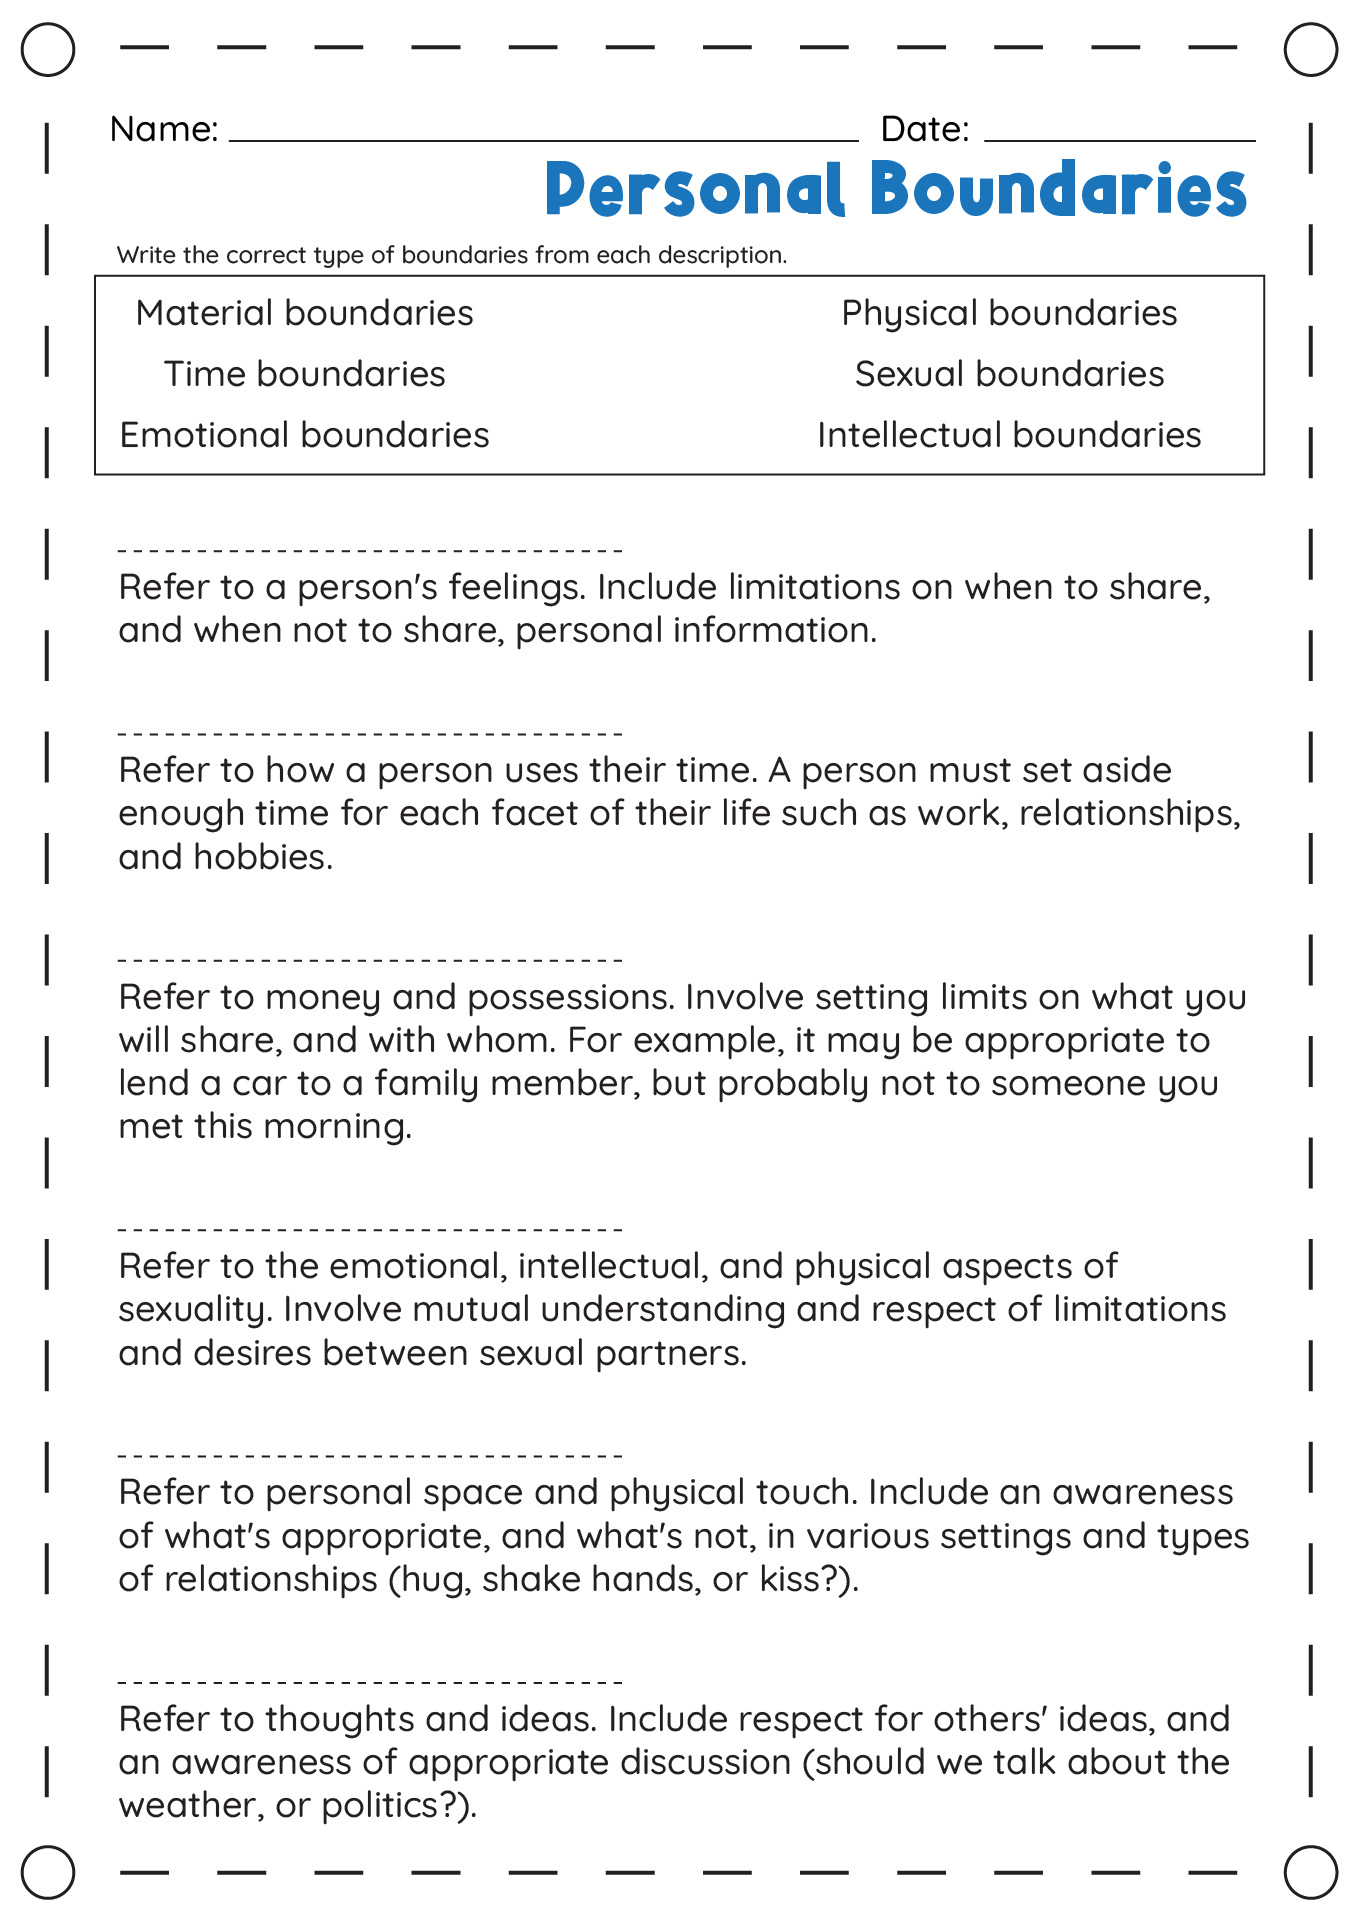 11 Best Images of Healthy Relationship Boundaries Worksheets - Signs of